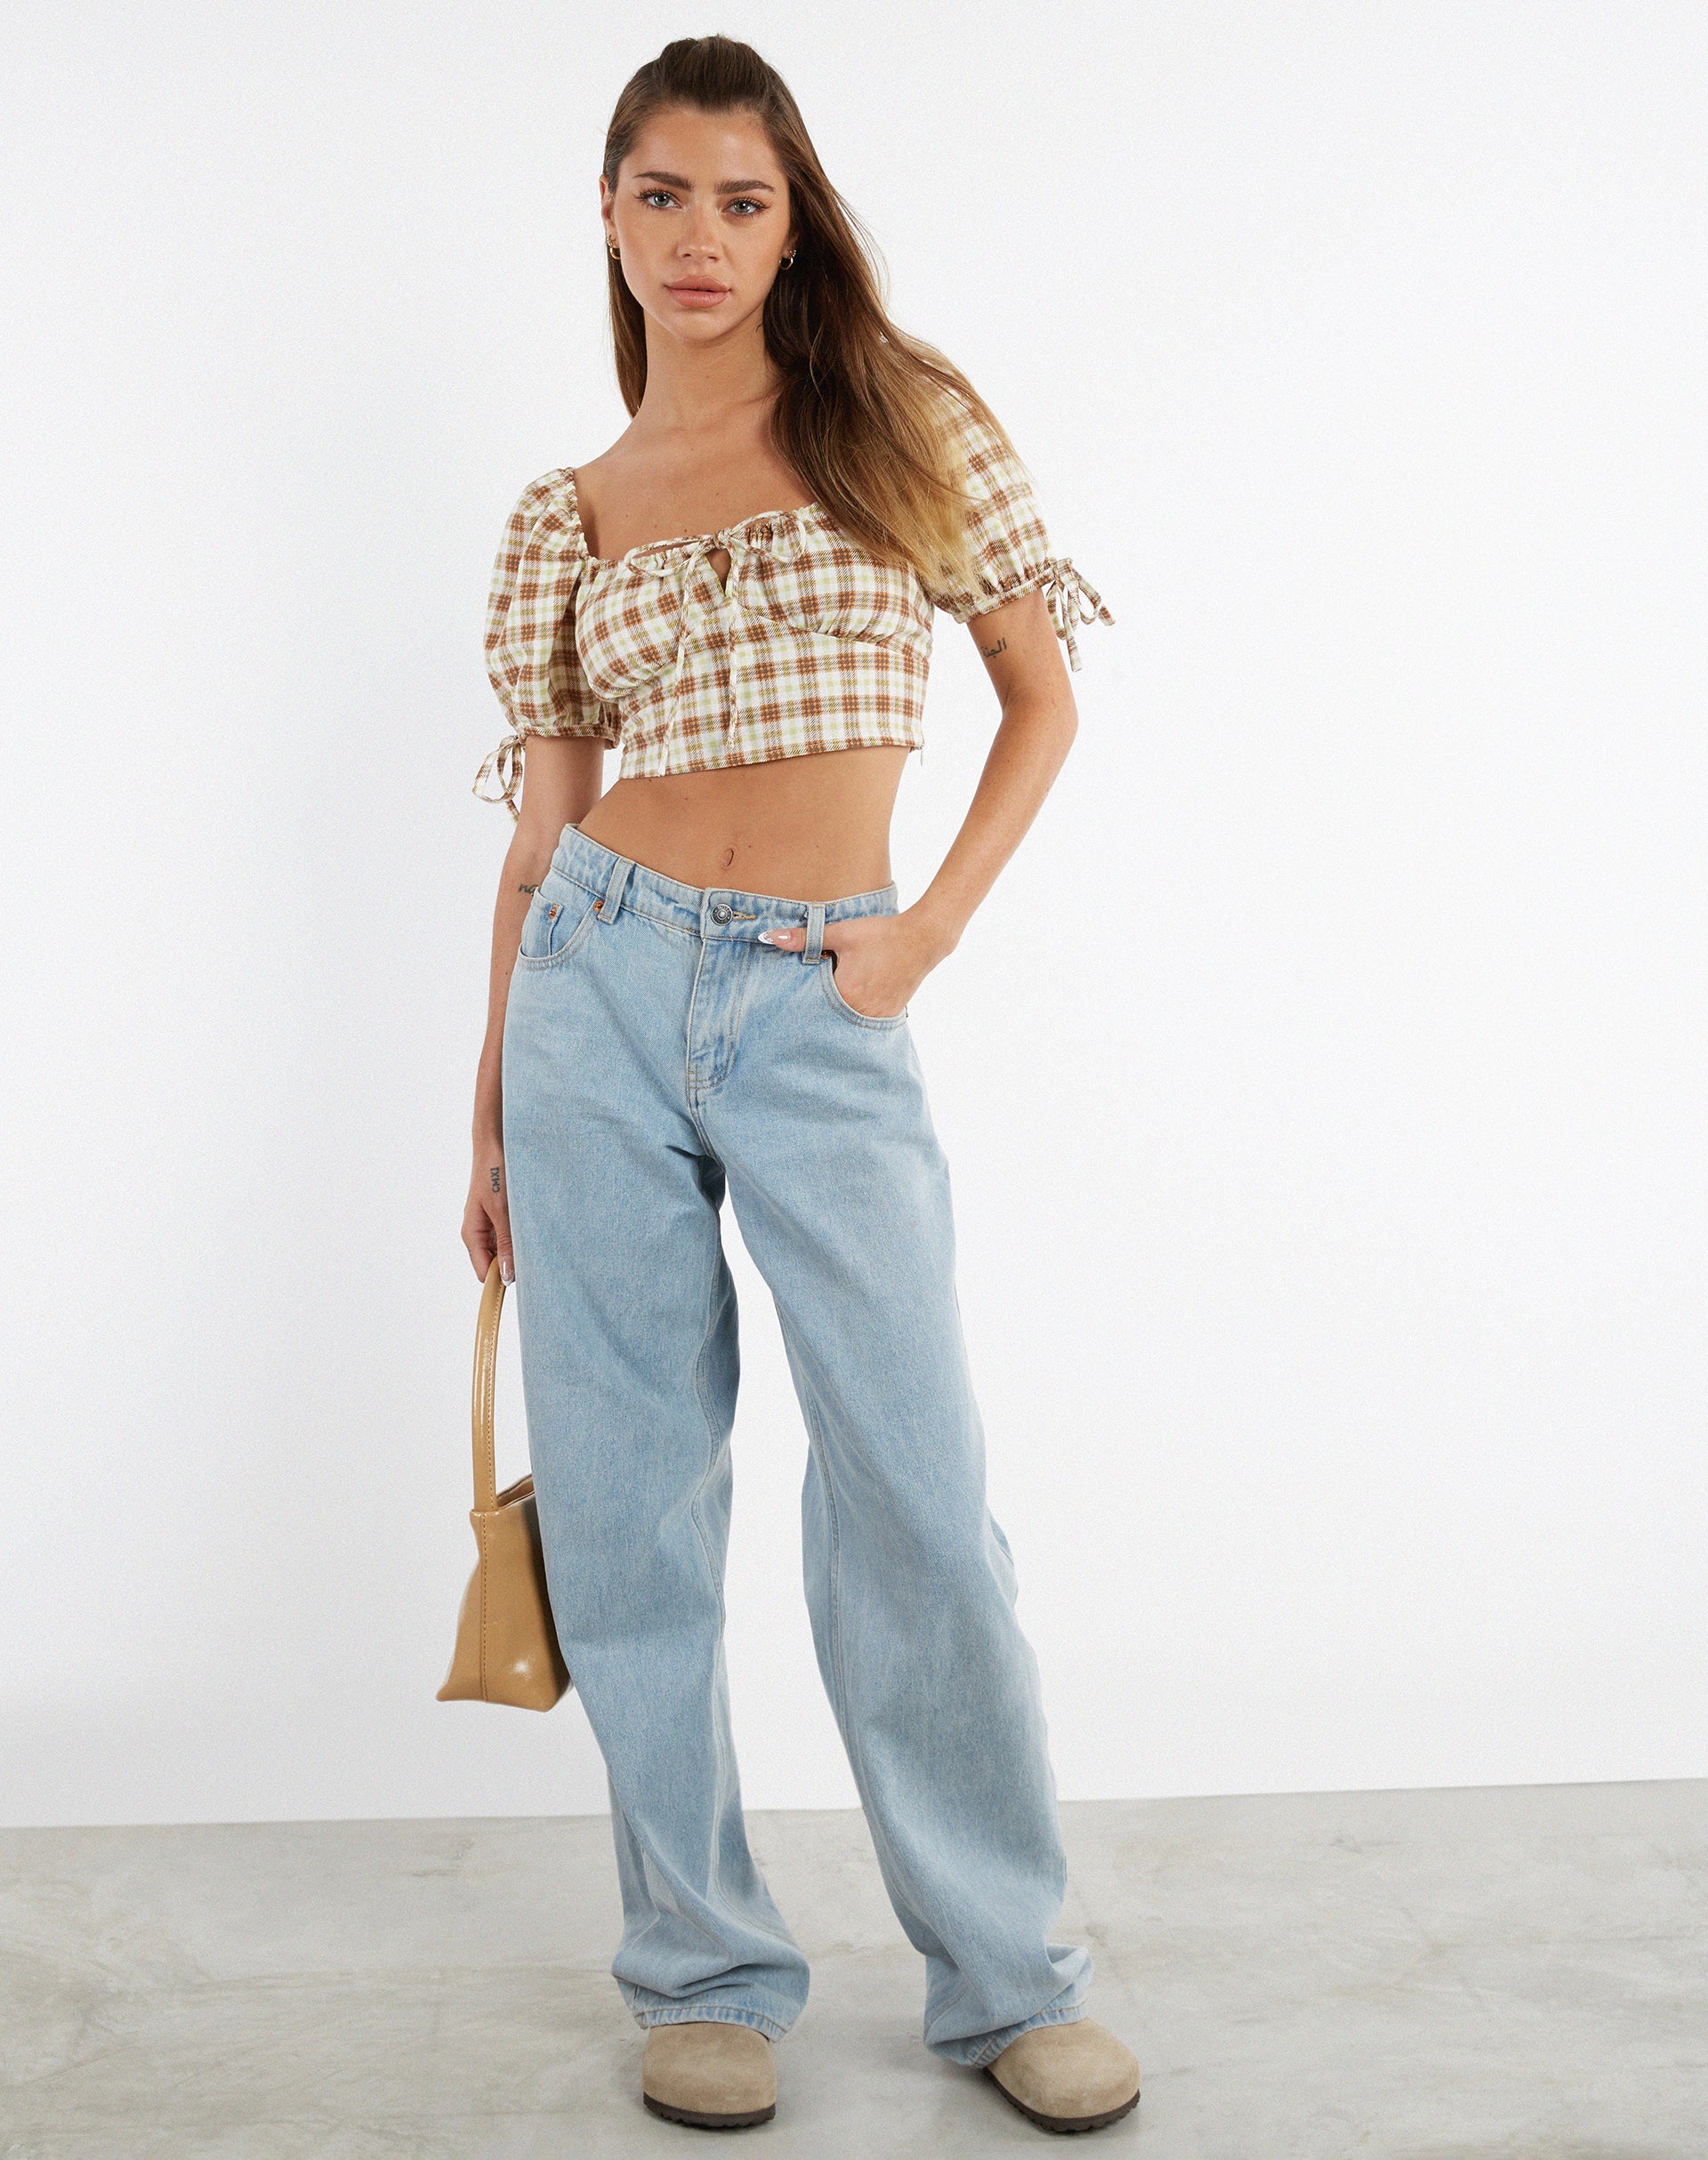 image of MOTEL X JACQUIE Auri Crop Top in Yellow Brown Check